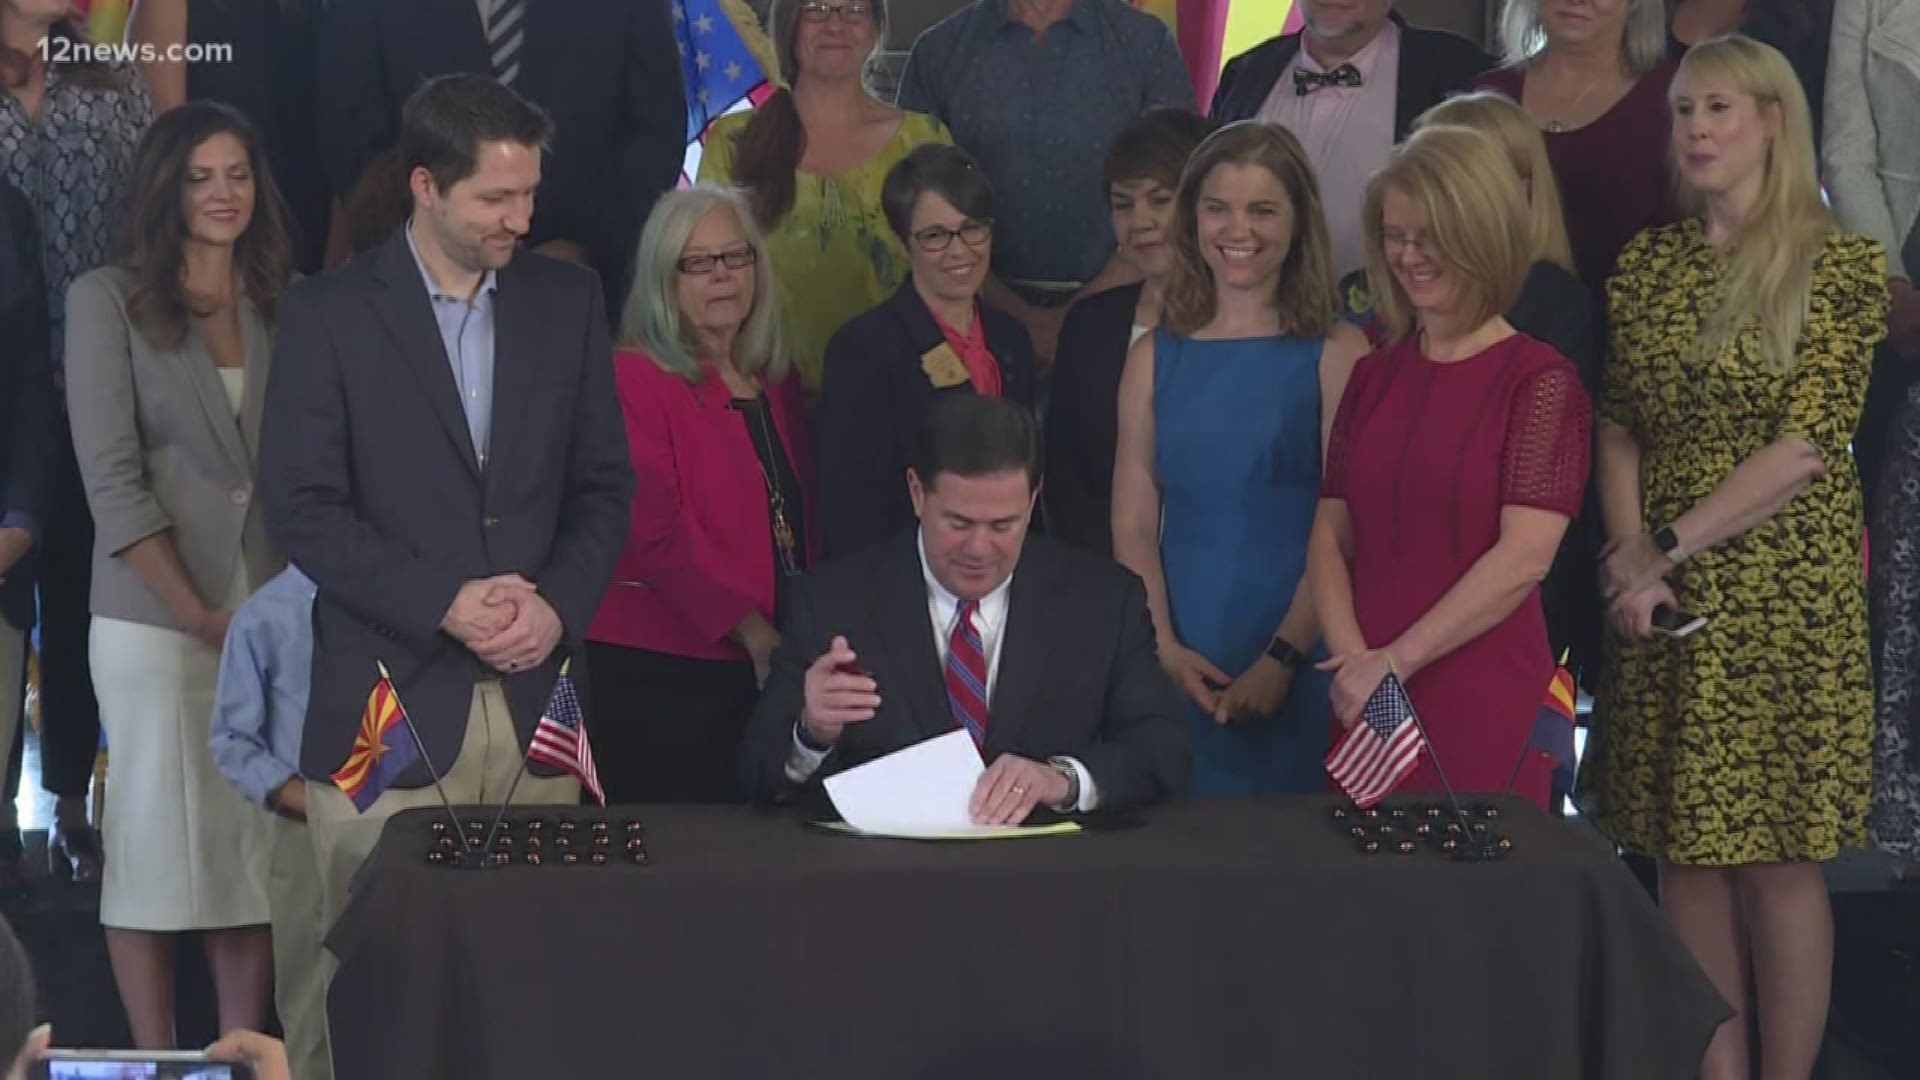 A new bill sponsored by Senator Paul Boyer extends the statute of limitations by 10 years for victims of childhood sexual assault. Arizona Governor Doug Ducey signed the bill into law Tuesday.